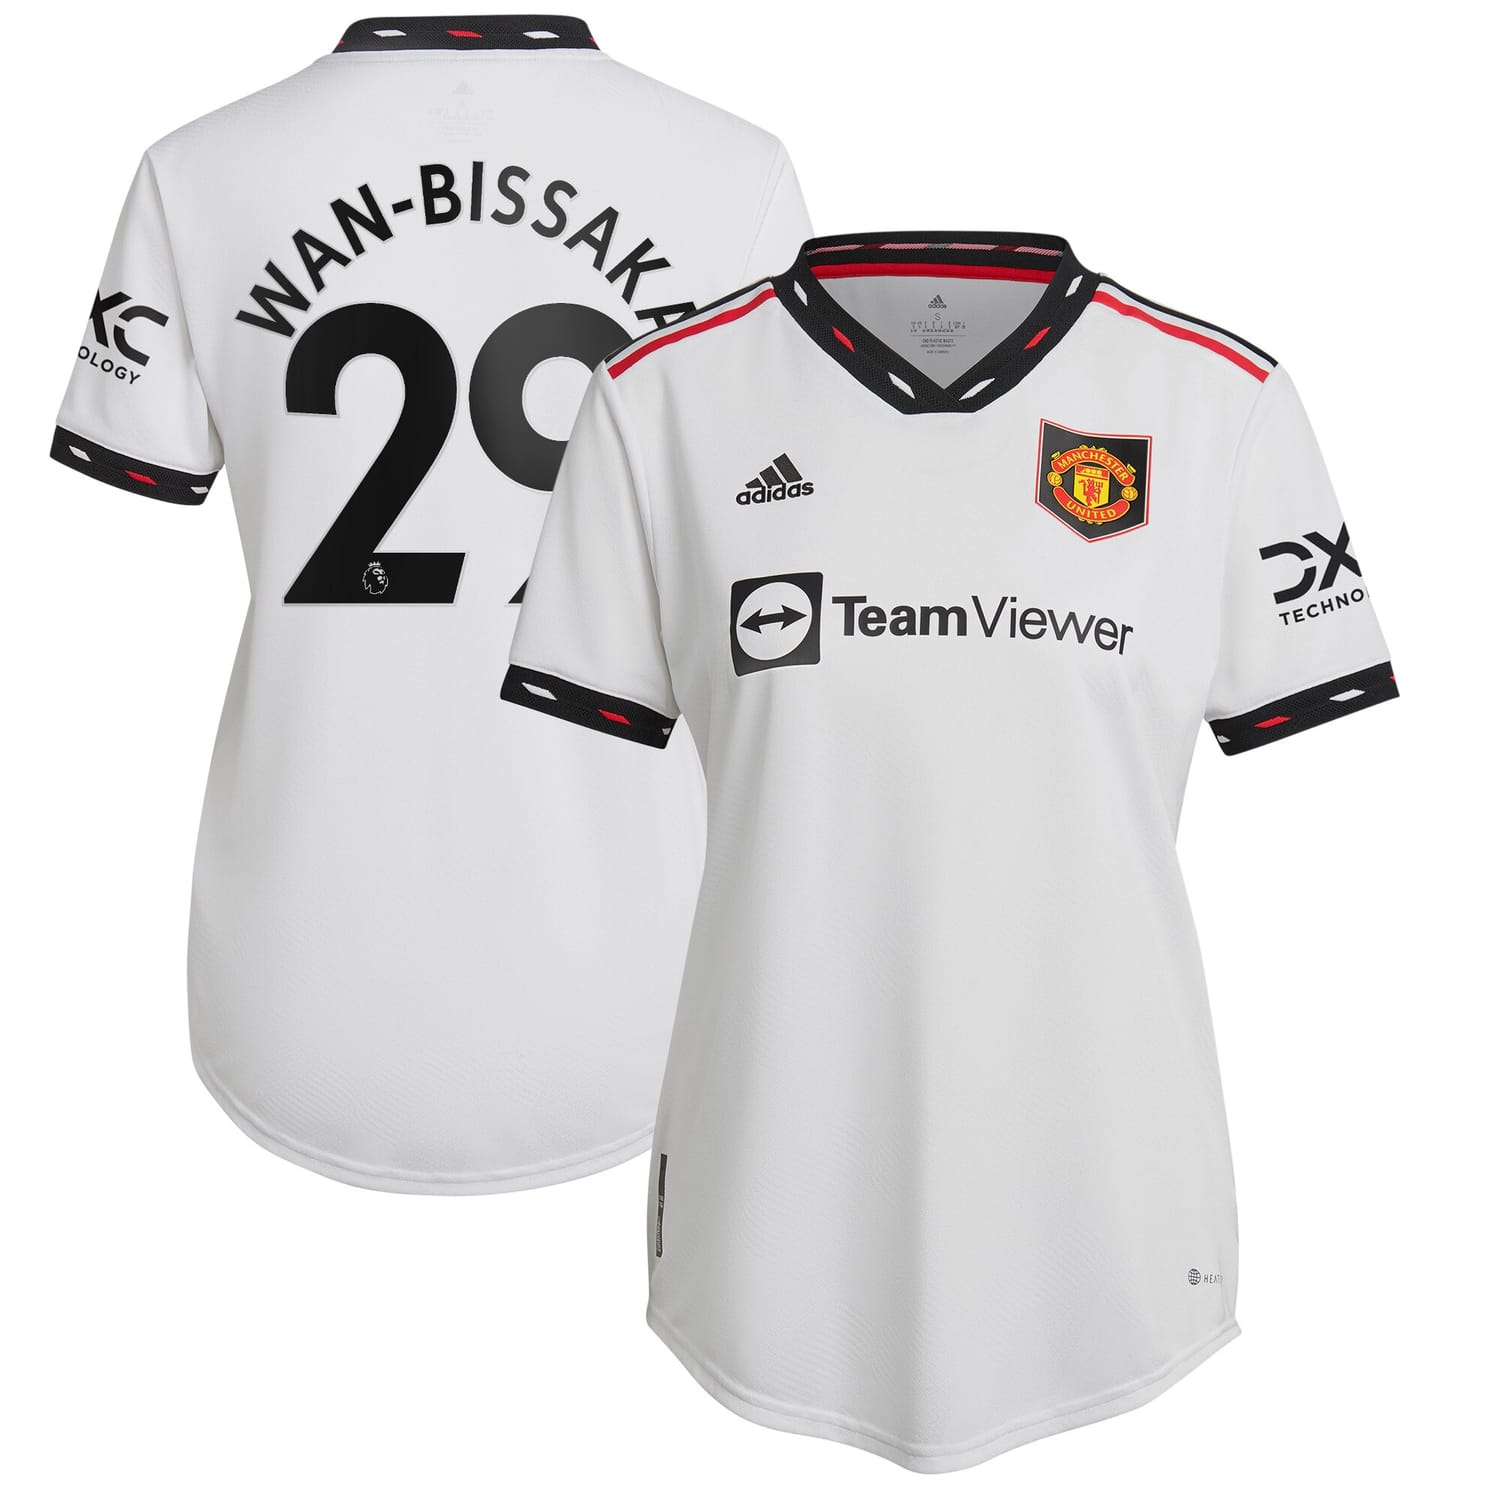 Premier League Manchester United Away Authentic Jersey Shirt 2022-23 player Aaron Wan-Bissaka 29 printing for Women